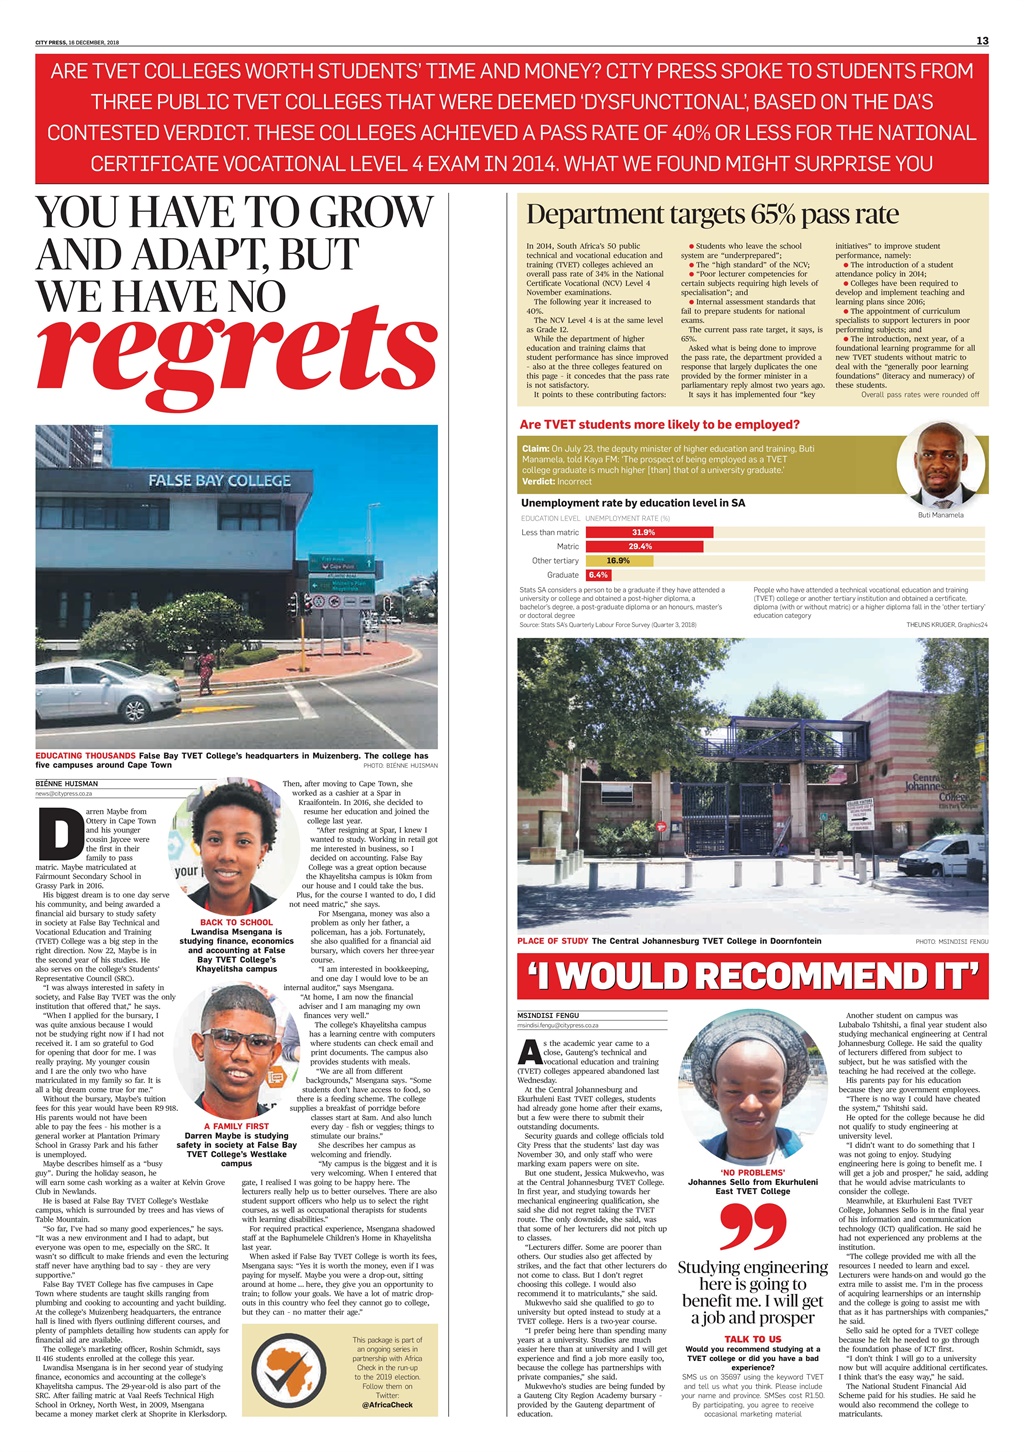 City Press published a special report on TVET colleges in collaboration with Africa Check.